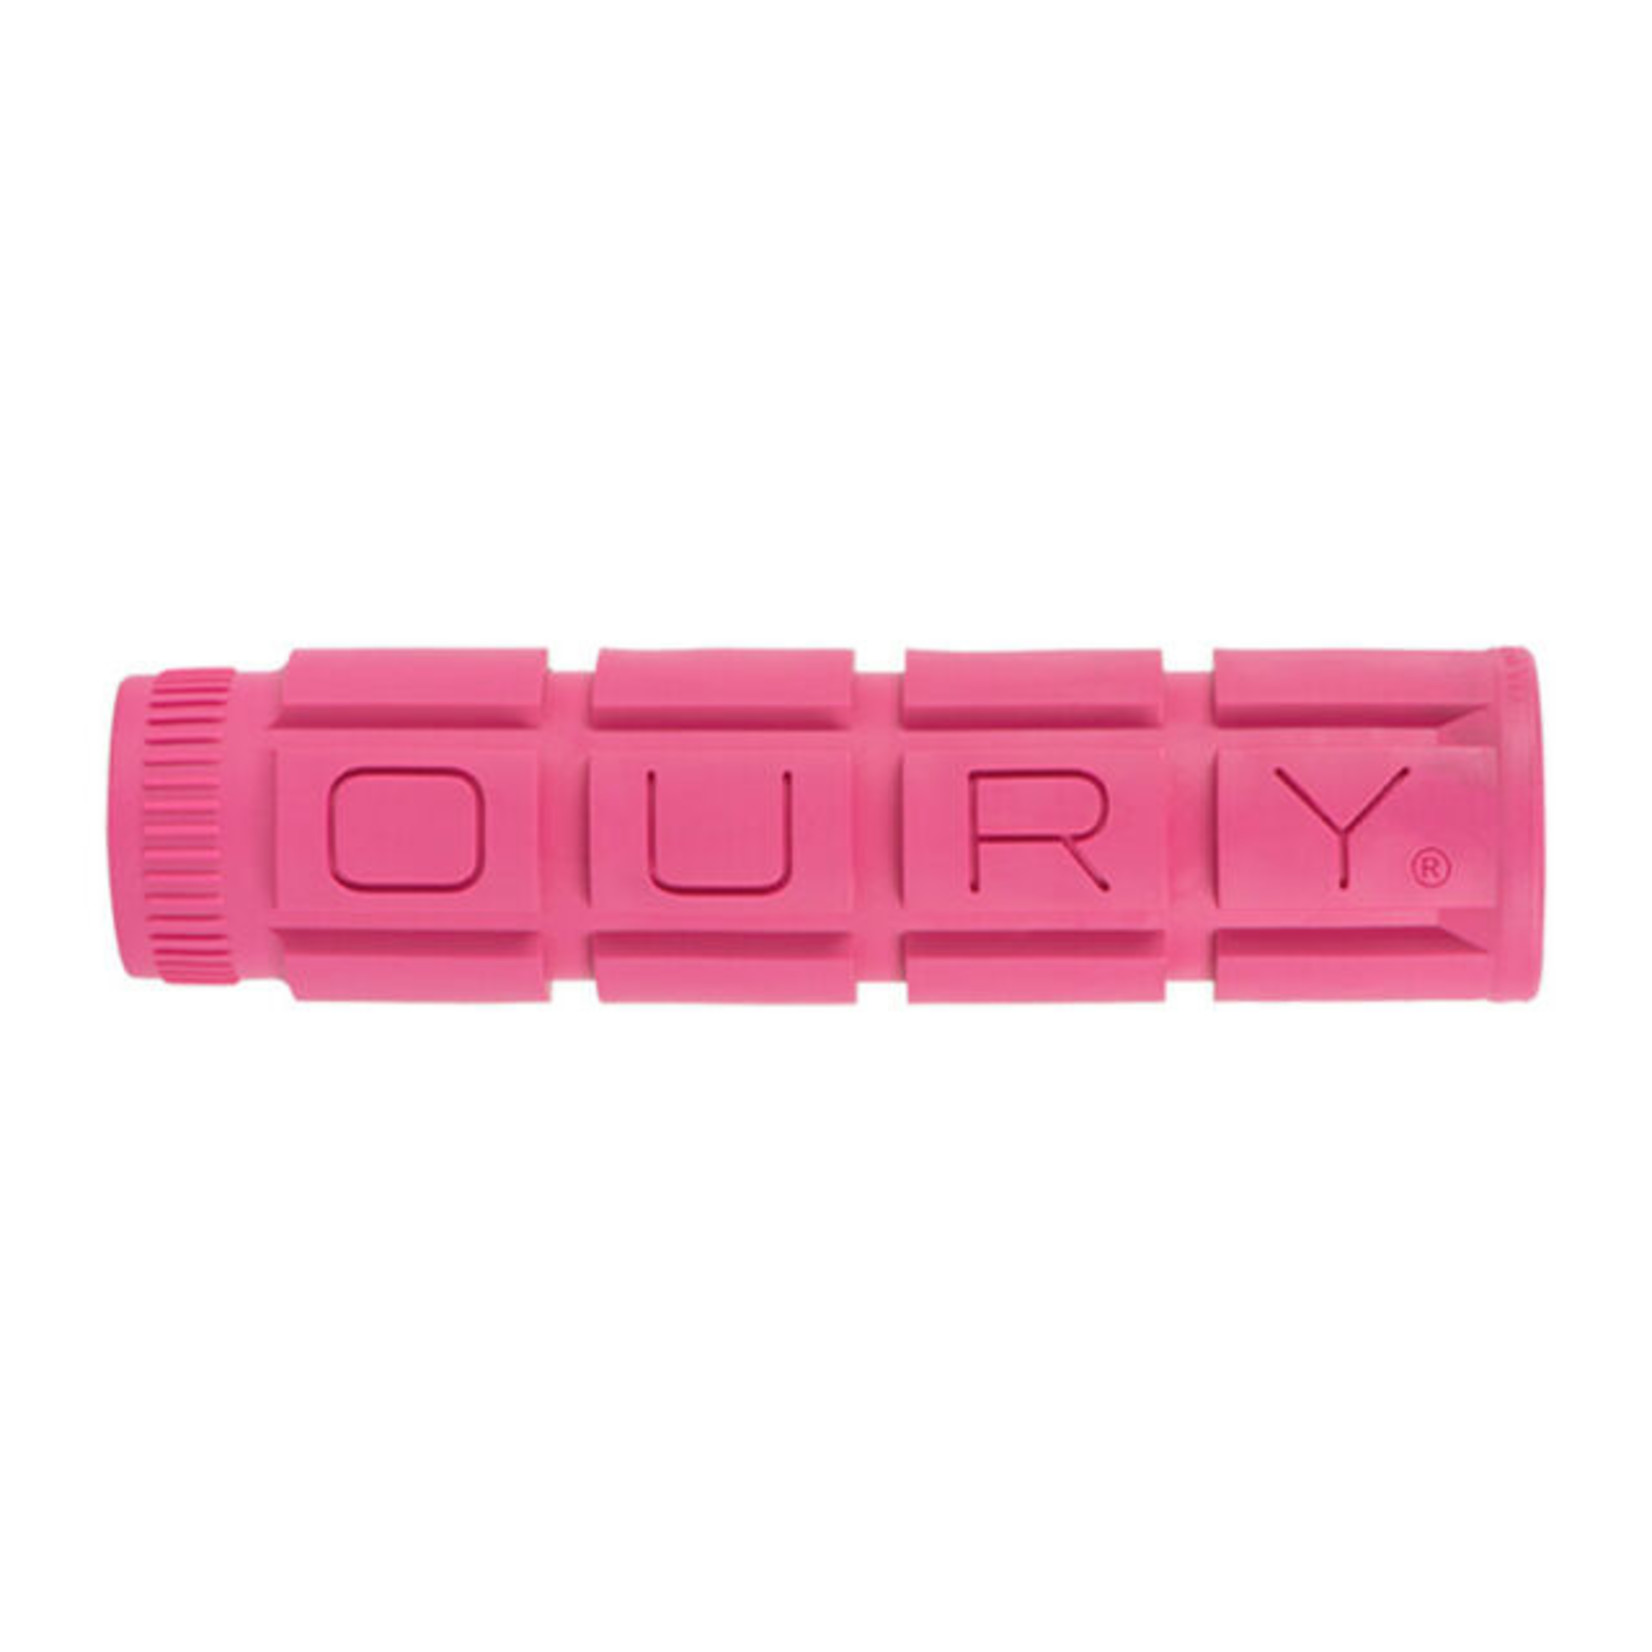 Oury Oury Single Compound Grips - Neon Pink